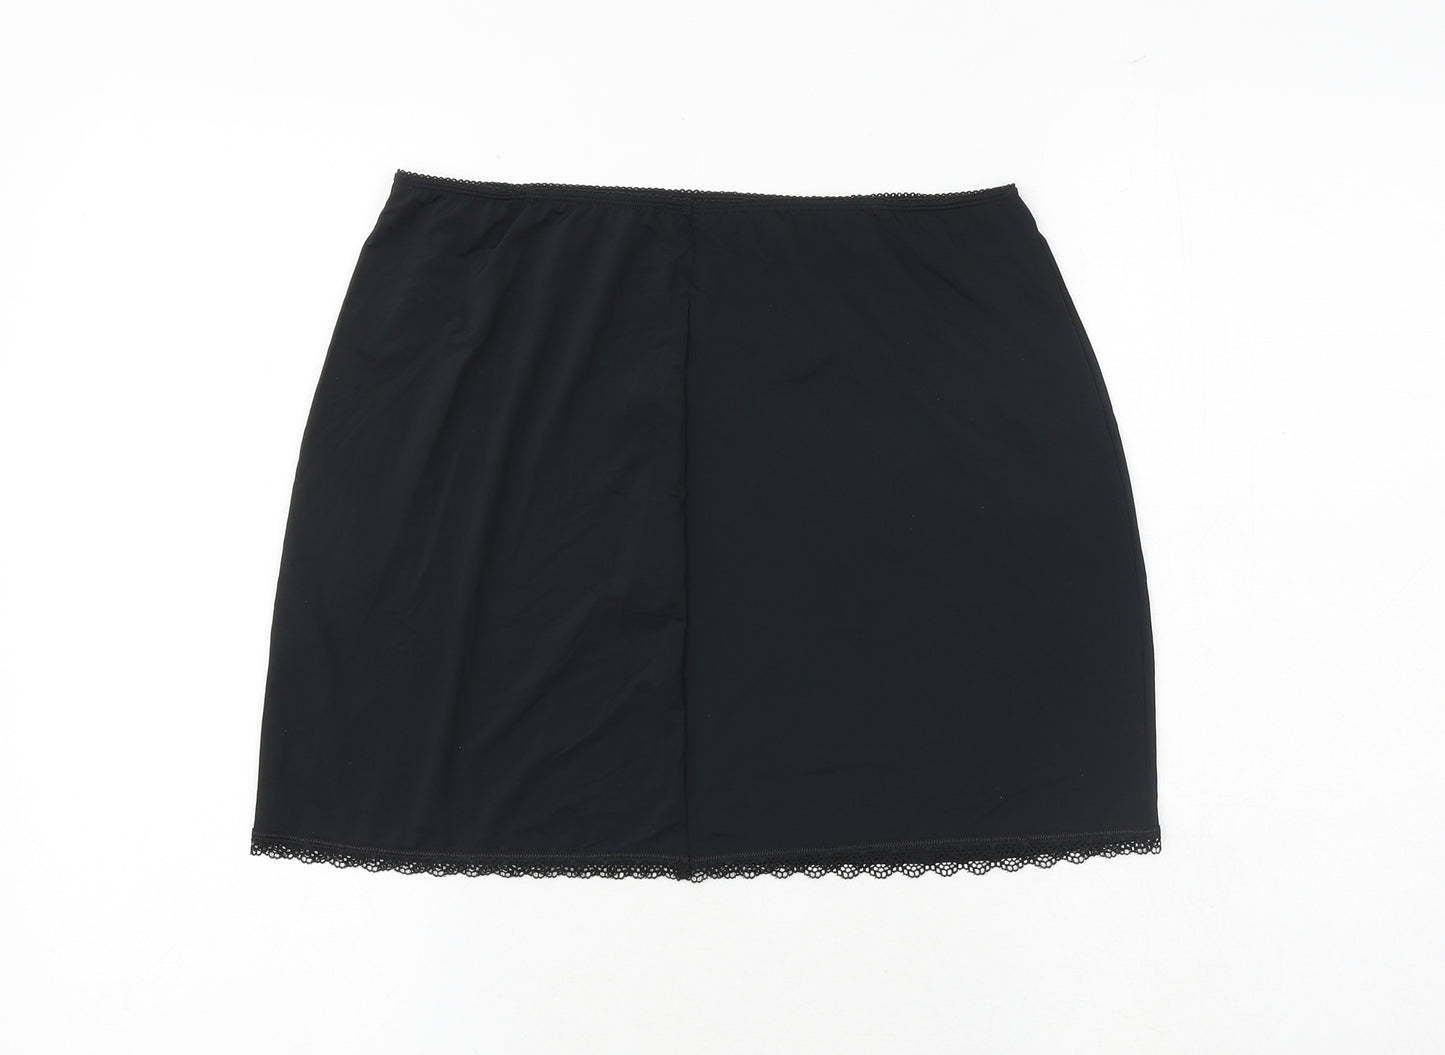 Marks and Spencer Womens Black Polyester A-Line Skirt Size 14 - Lace Trim